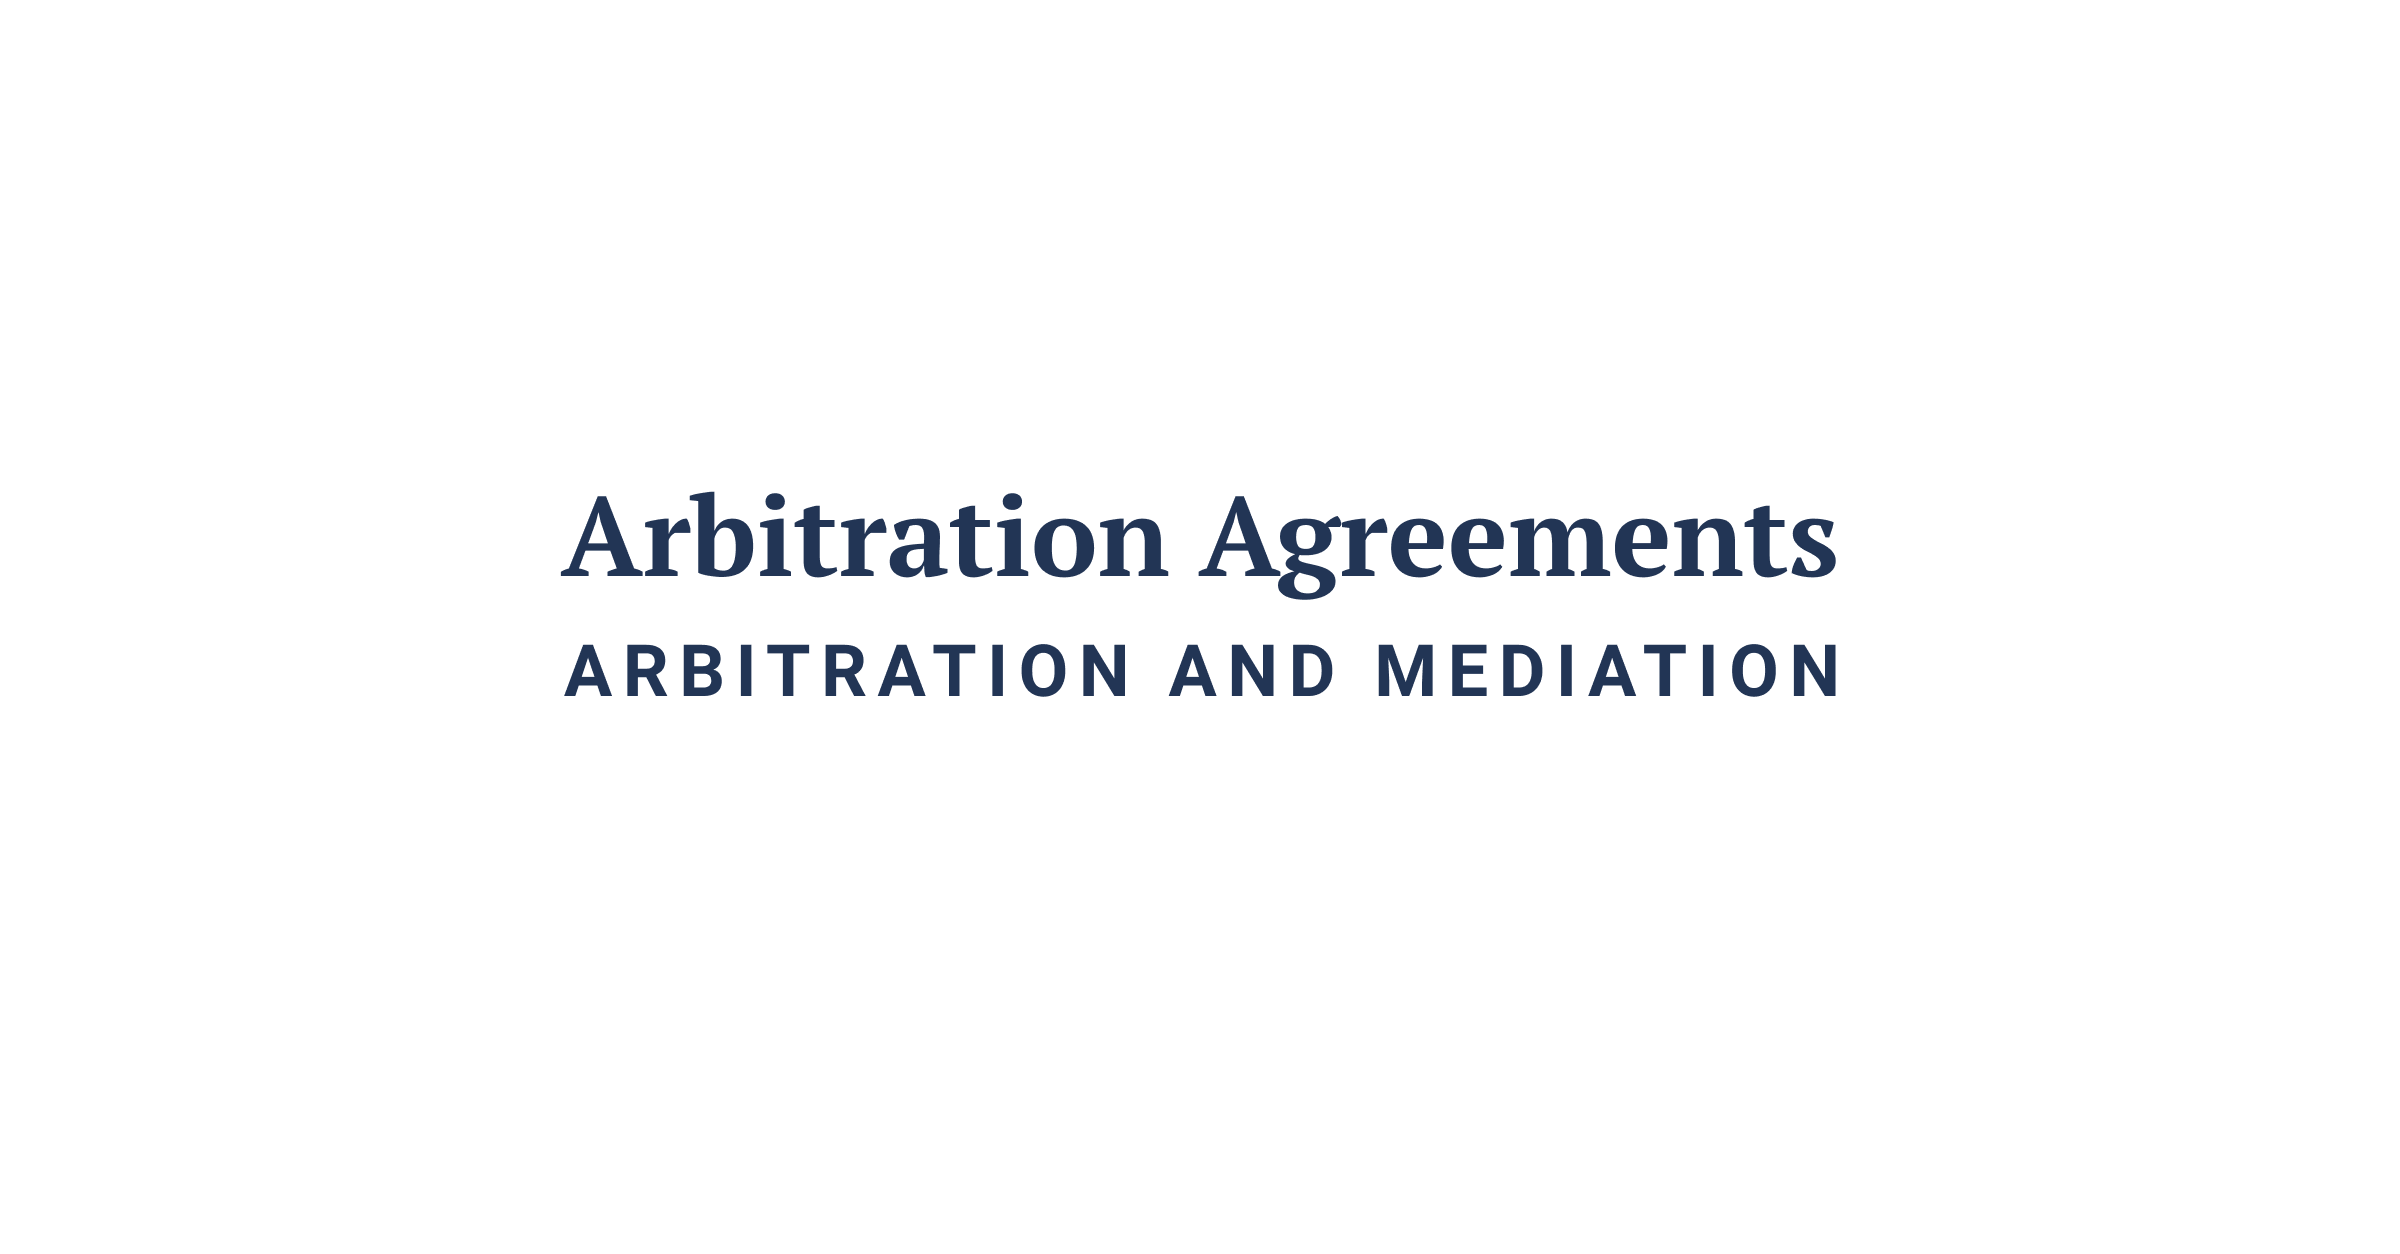 Arbitration Company product image reference 1